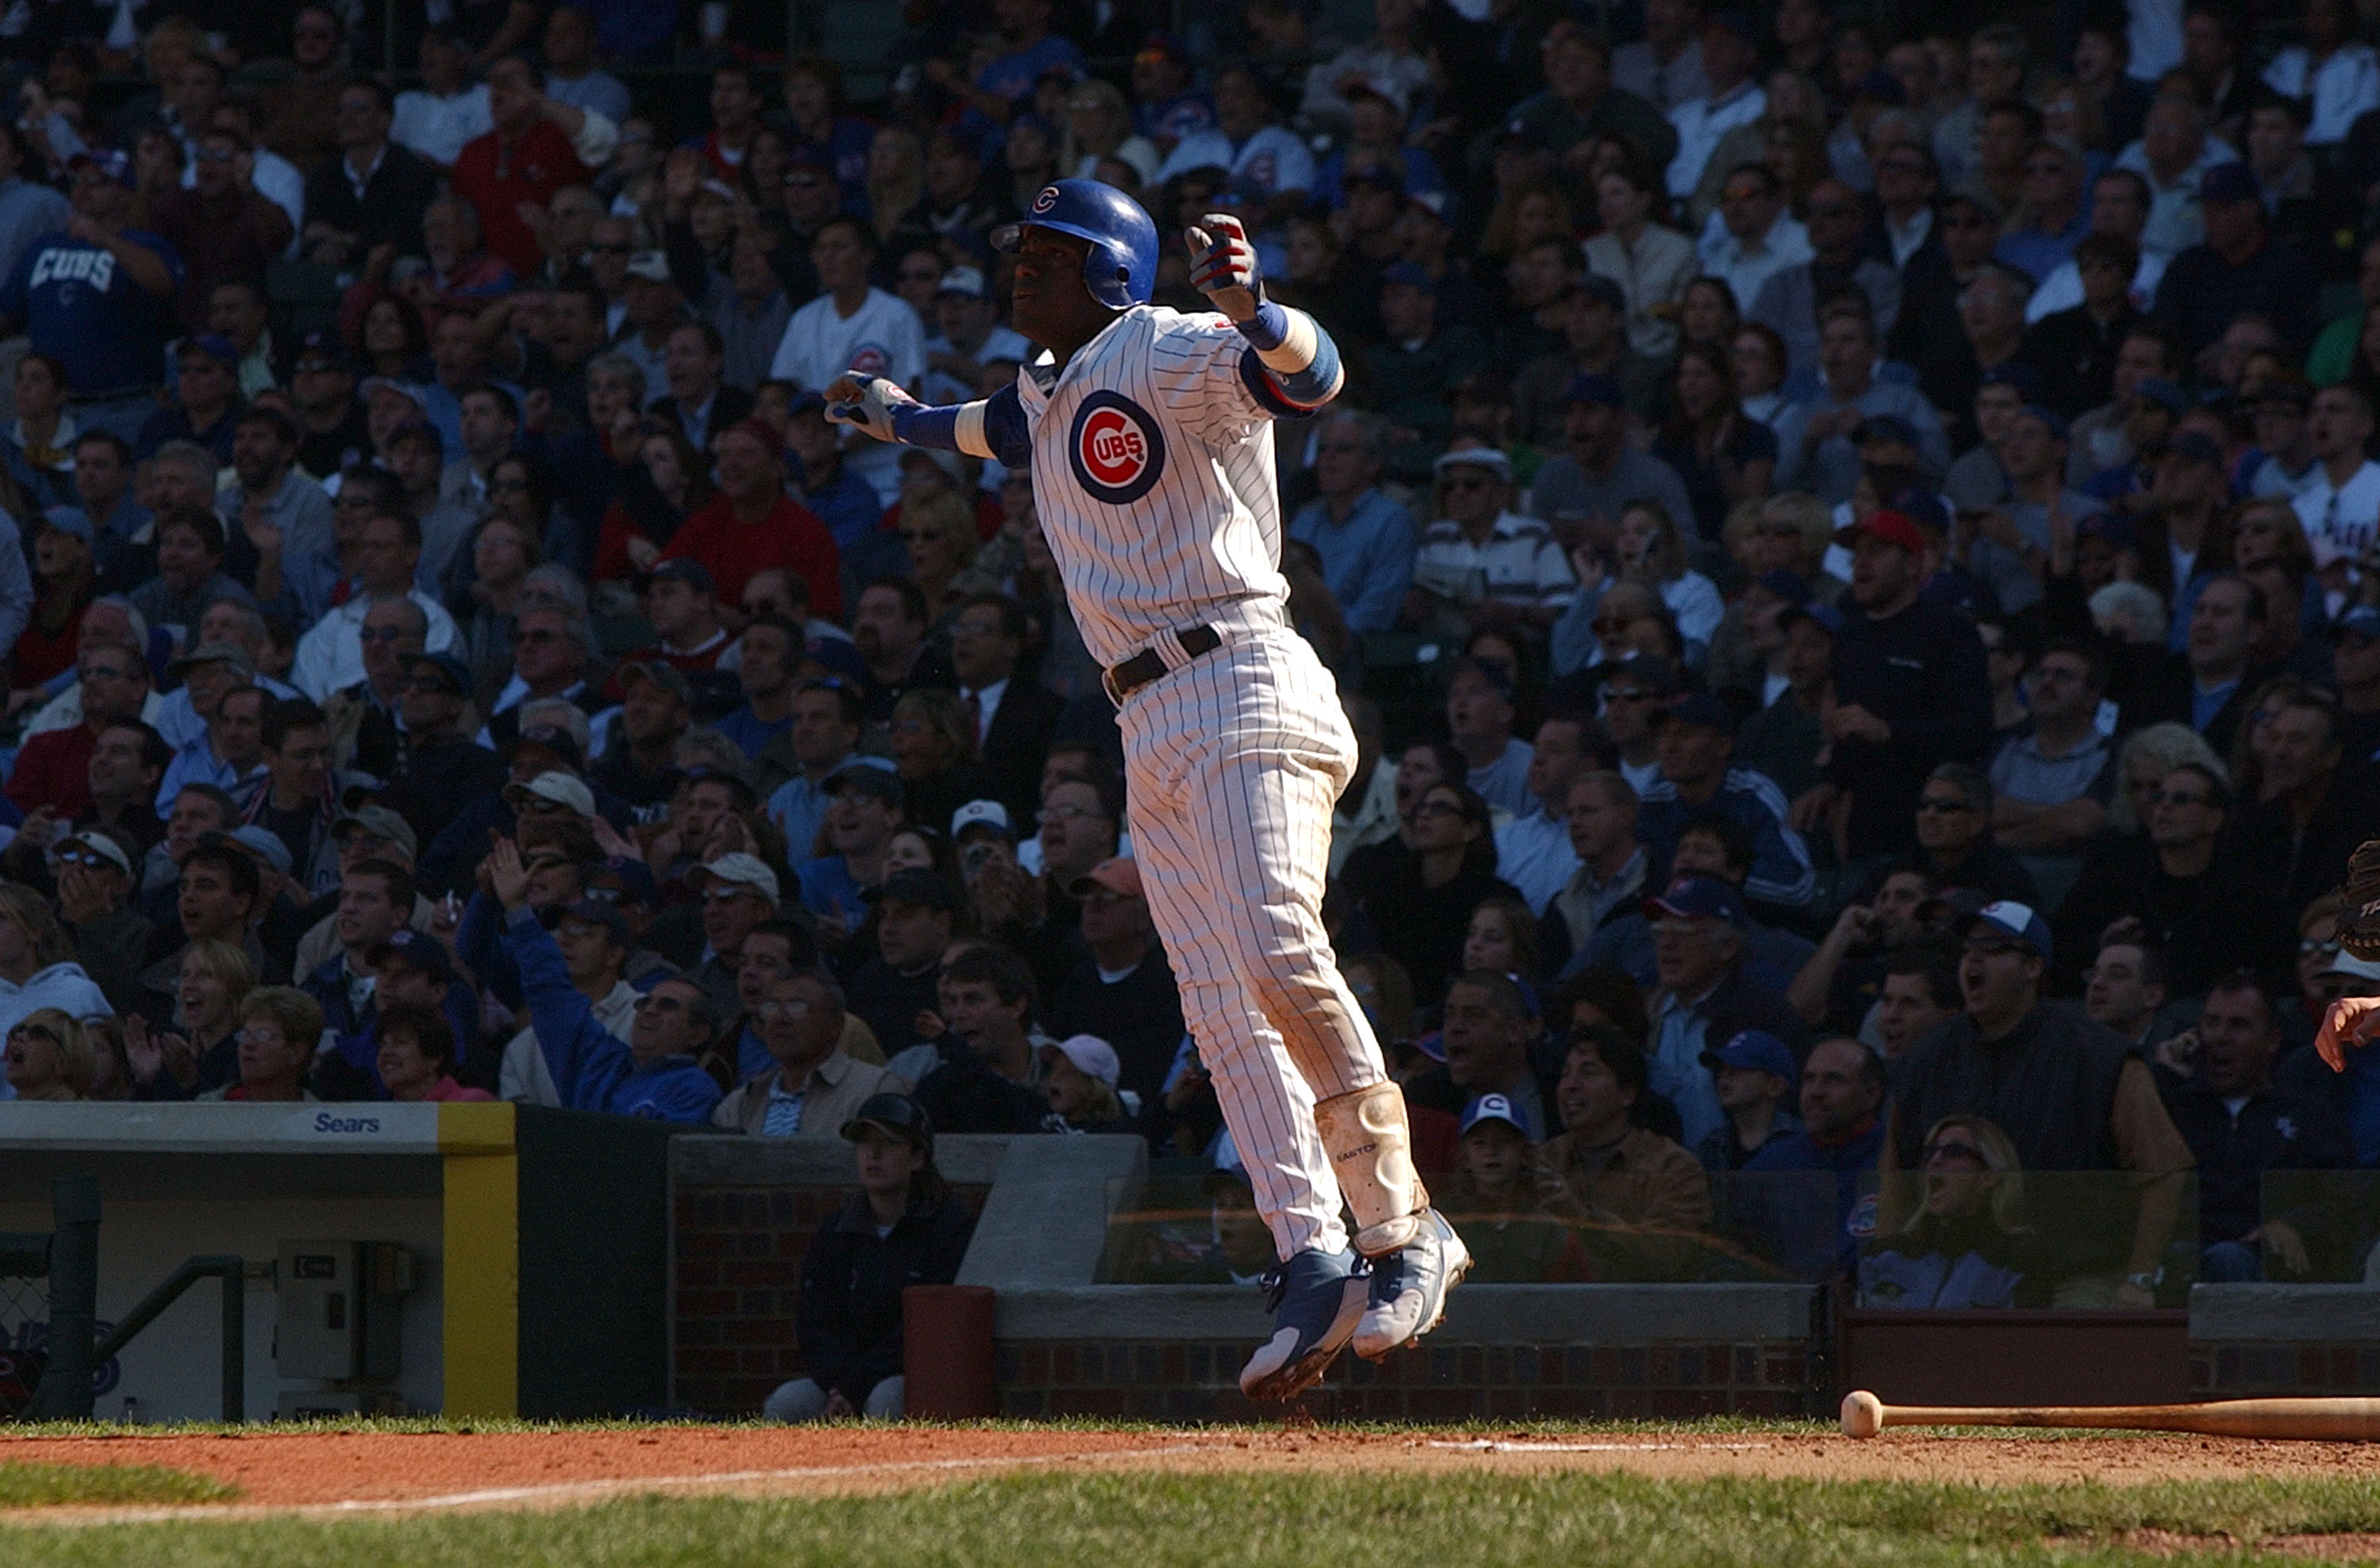 Sammy Sosa's “Bunny Hop” and the 25 Best Player Trademarks in MLB